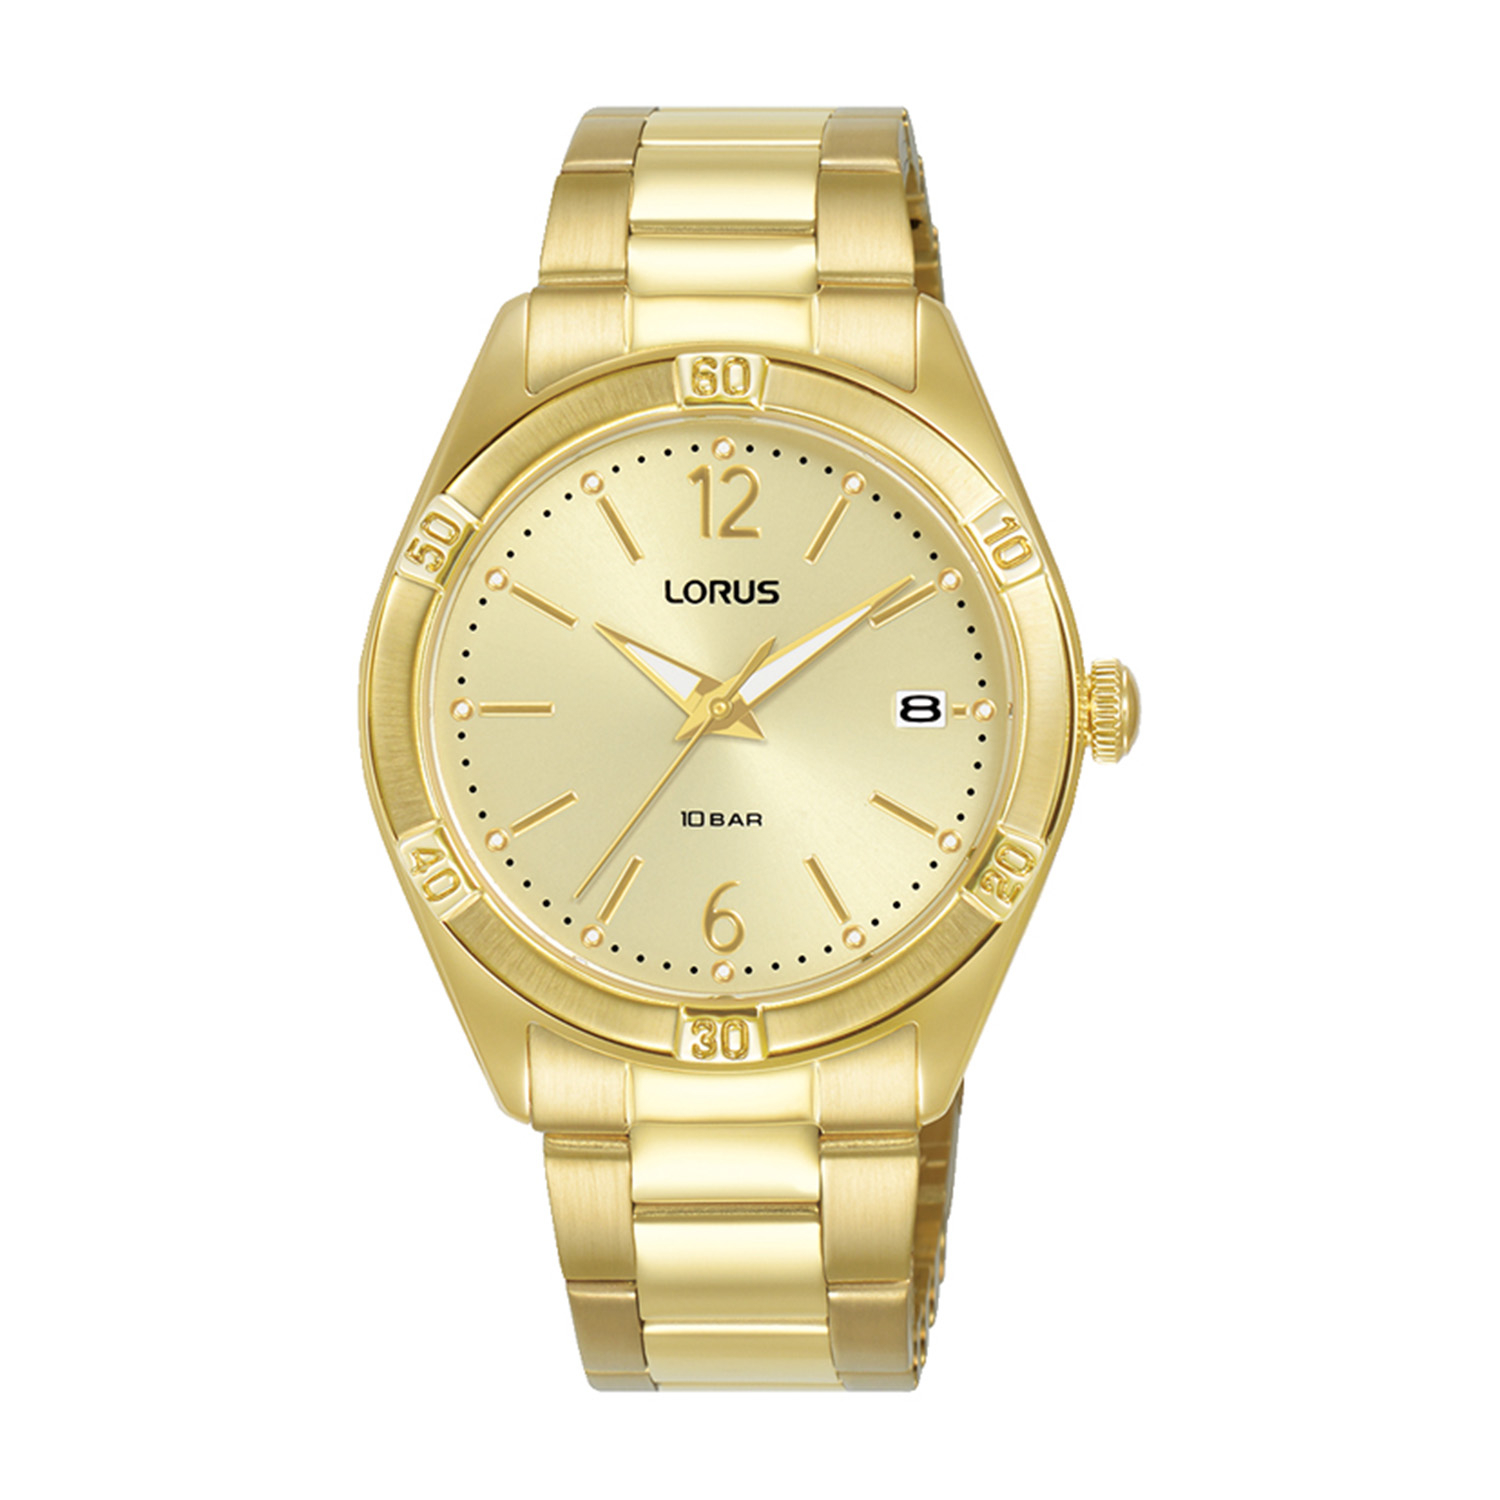 Womens watch LORUS made of gold stainless steel with gold dial and bracelet.